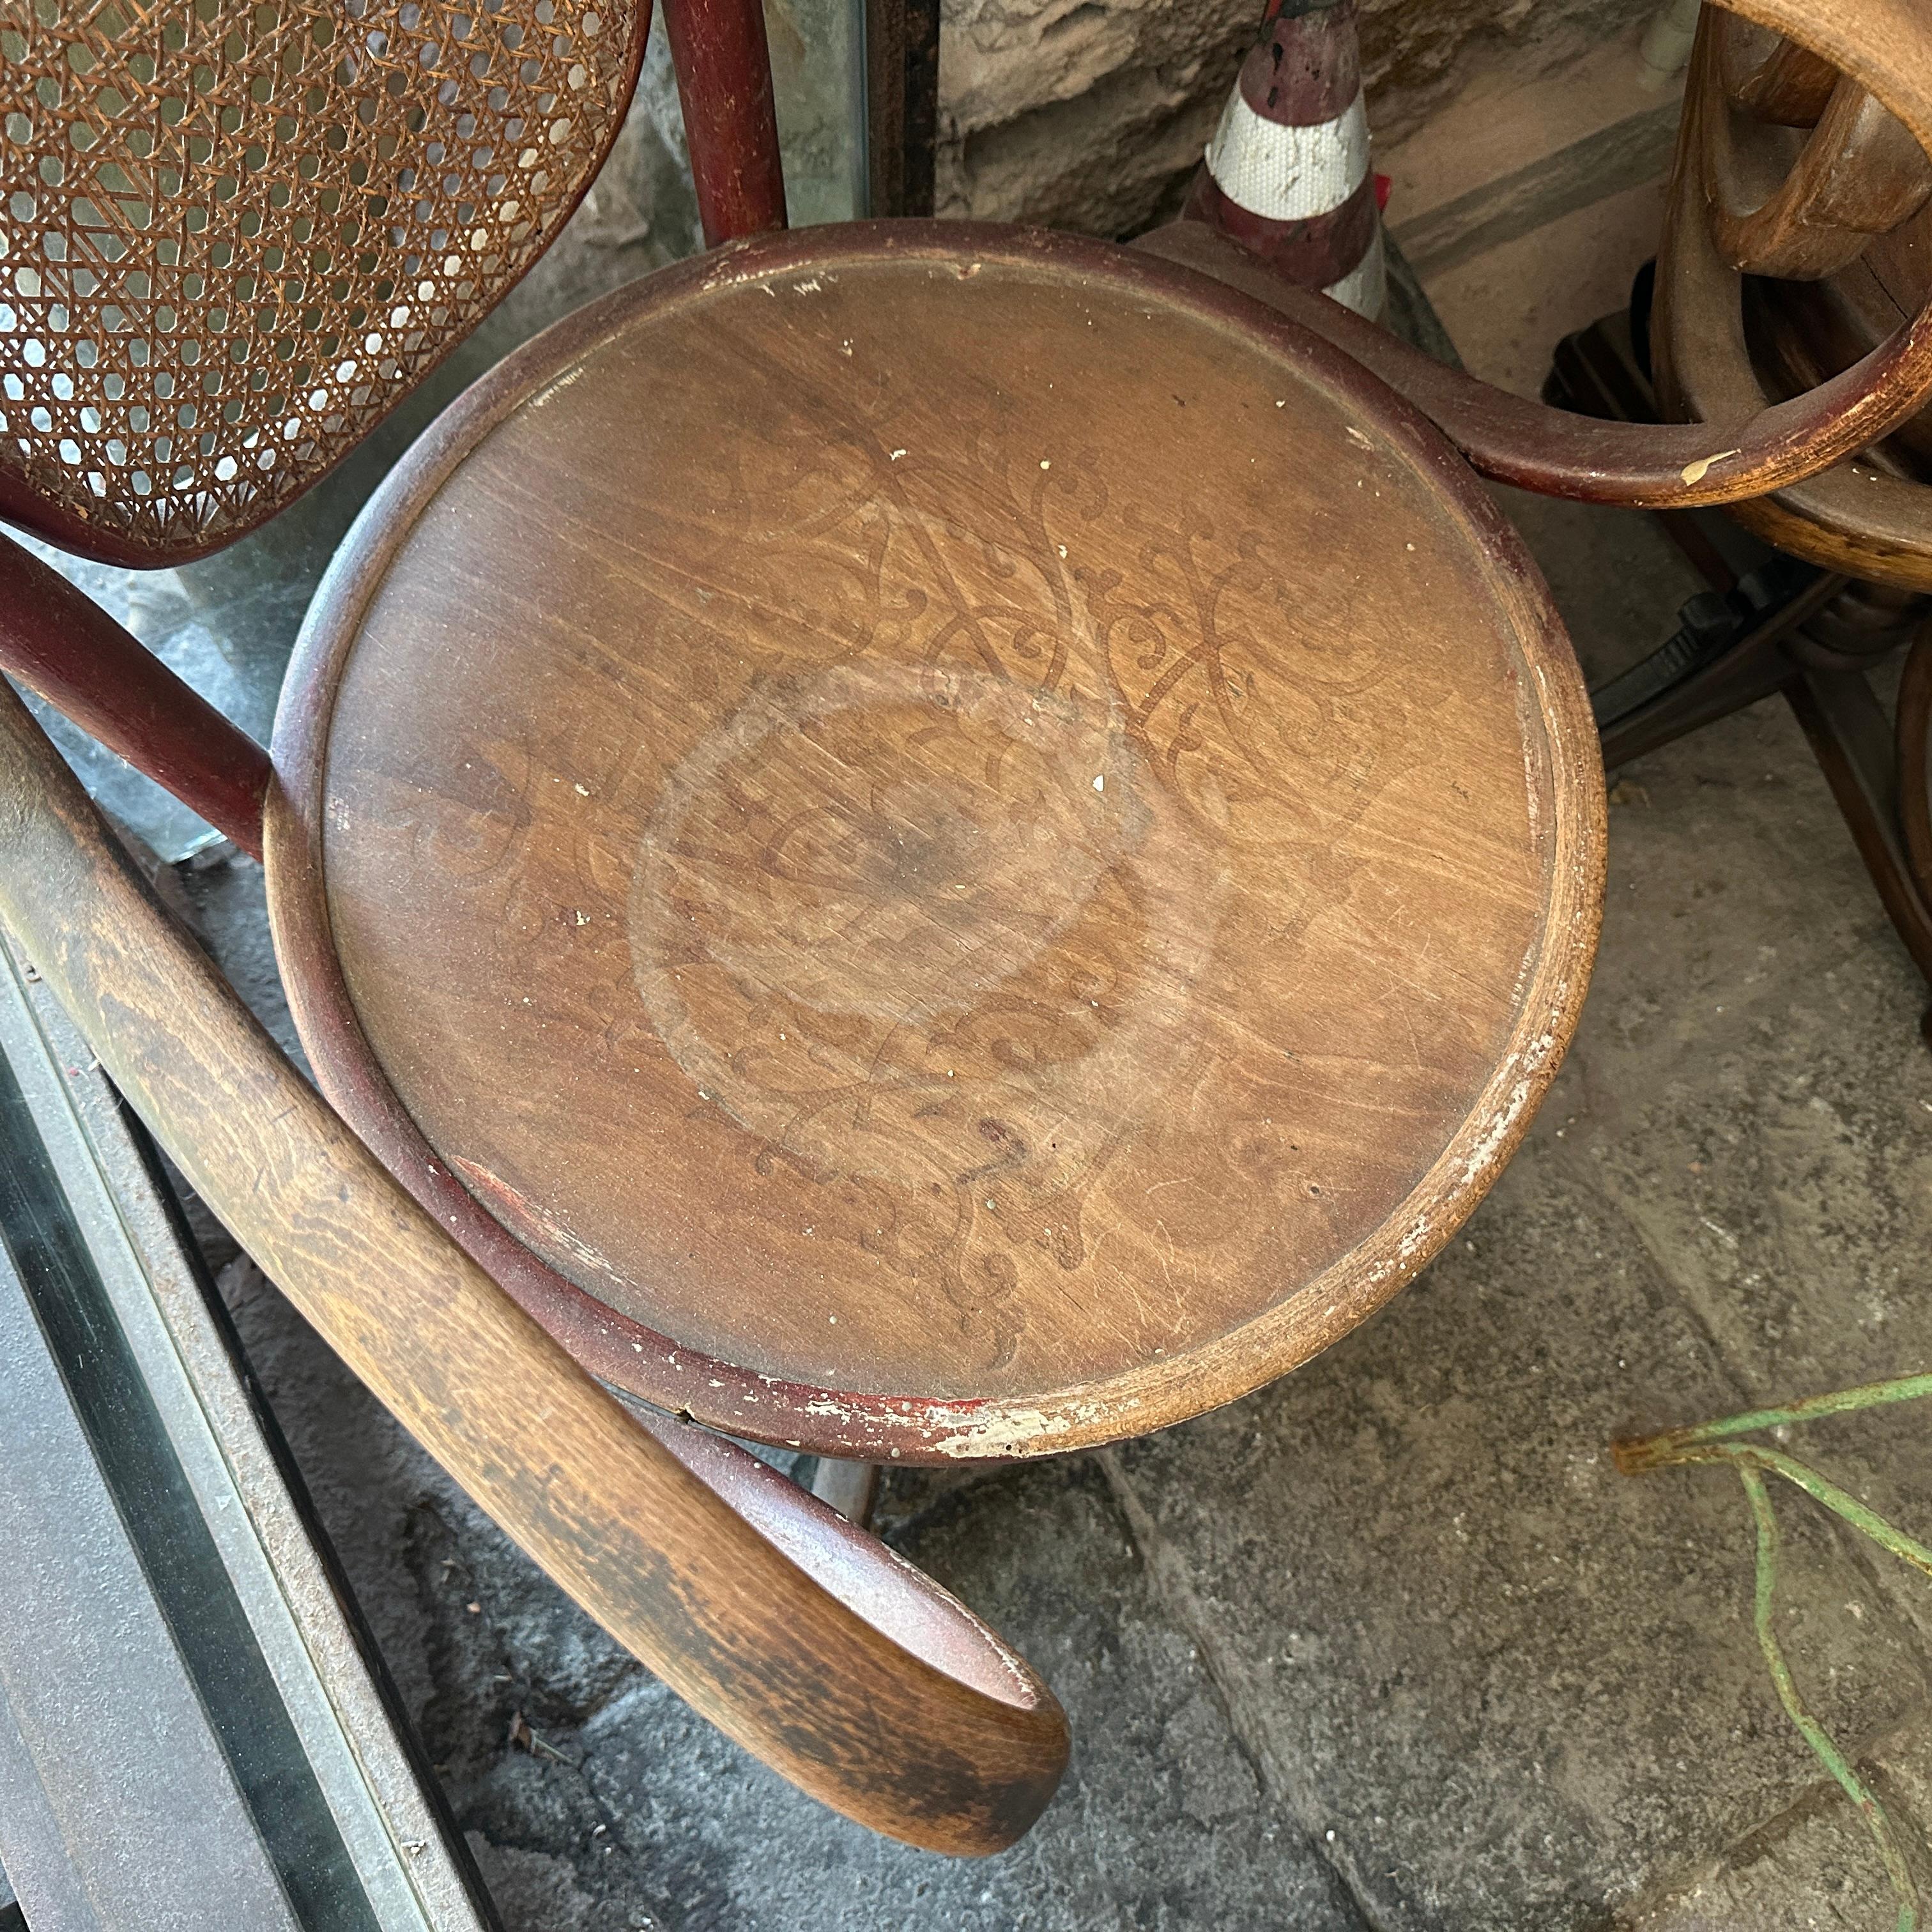 Early 20th Century Art Nouveau Wood and Wicker Tonet Italian Swivel Barber Chair In Good Condition For Sale In Catania, Sicilia